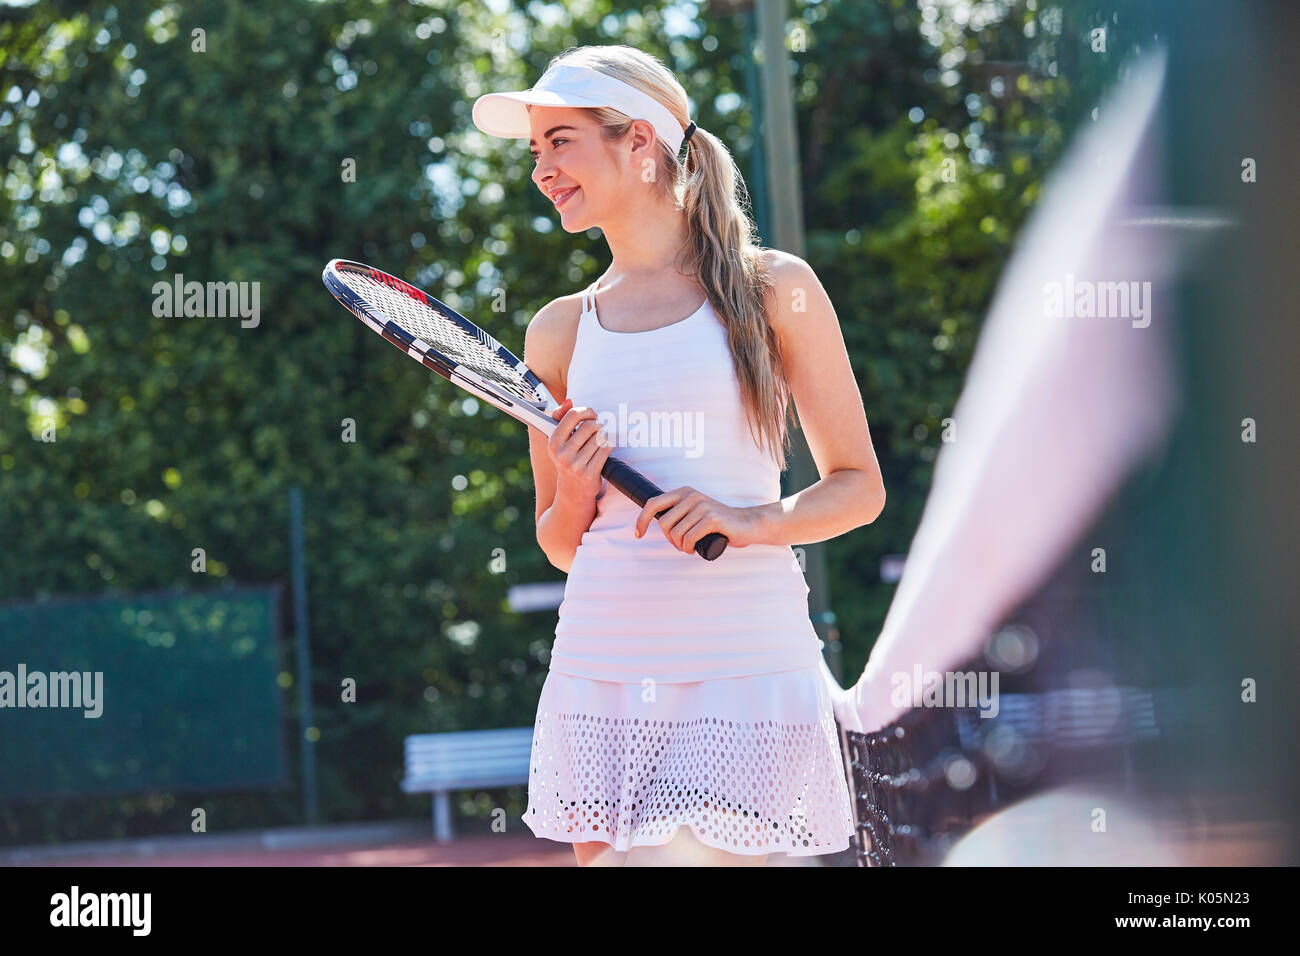 Smiling young female tennis player holding tennis racket along sunny net Stock Photo